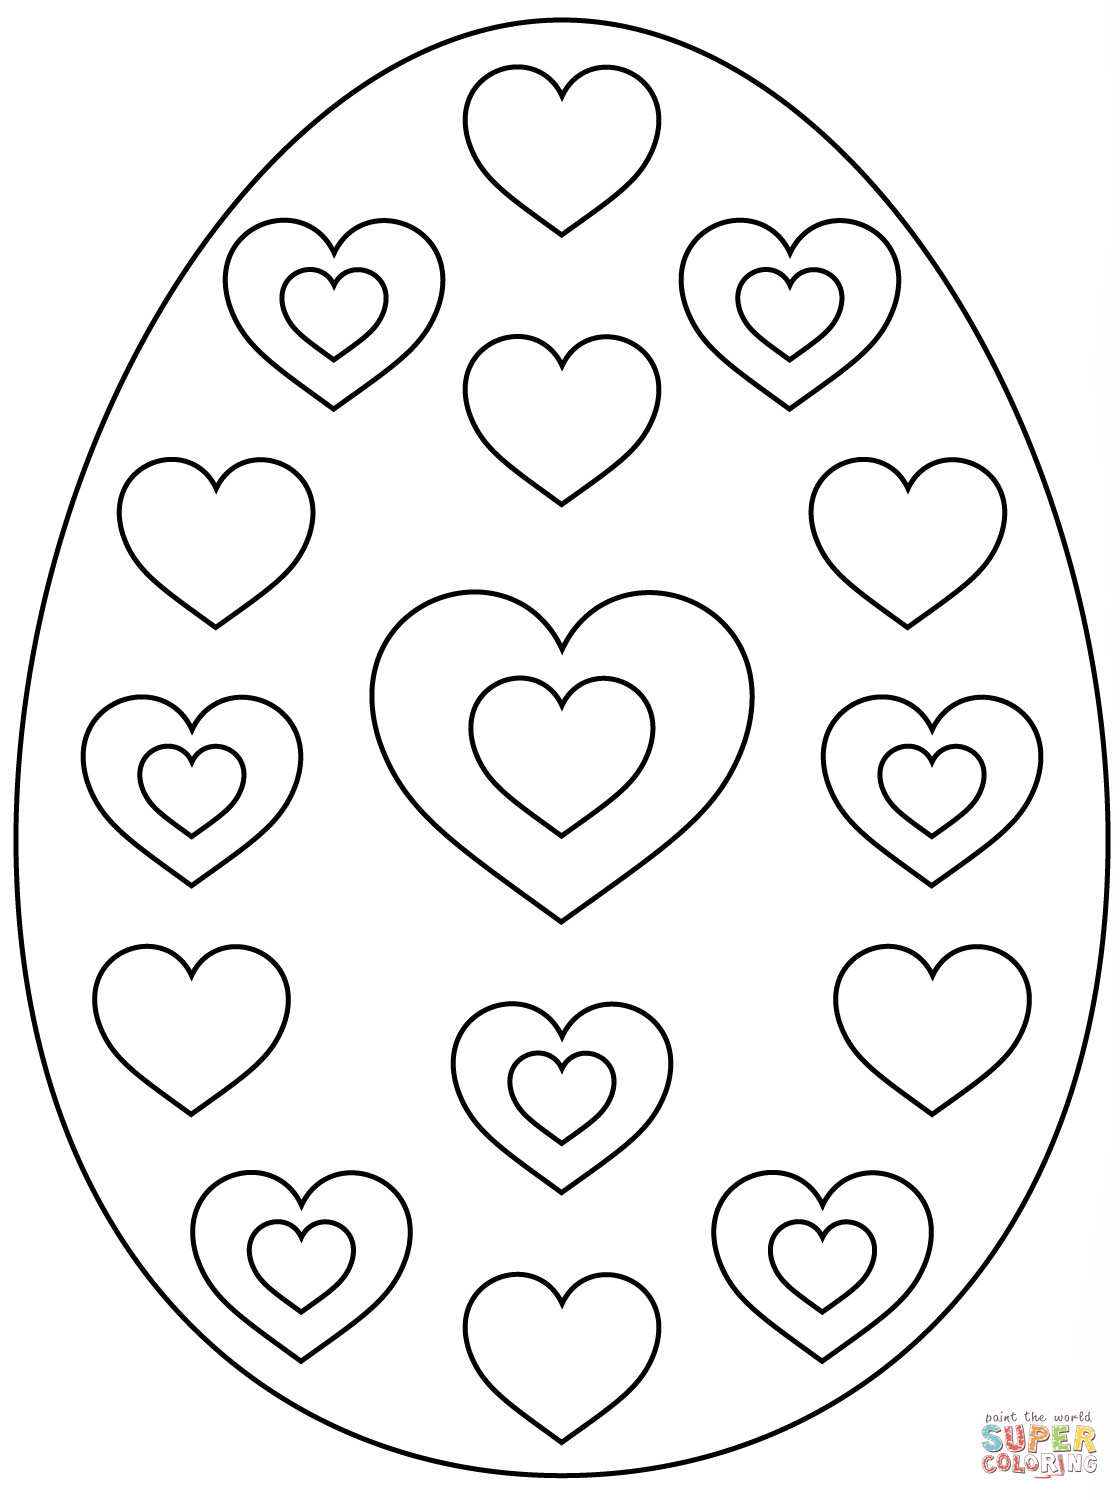 Printable Easter Egg Coloring Pages
 Easter Egg with Hearts coloring page